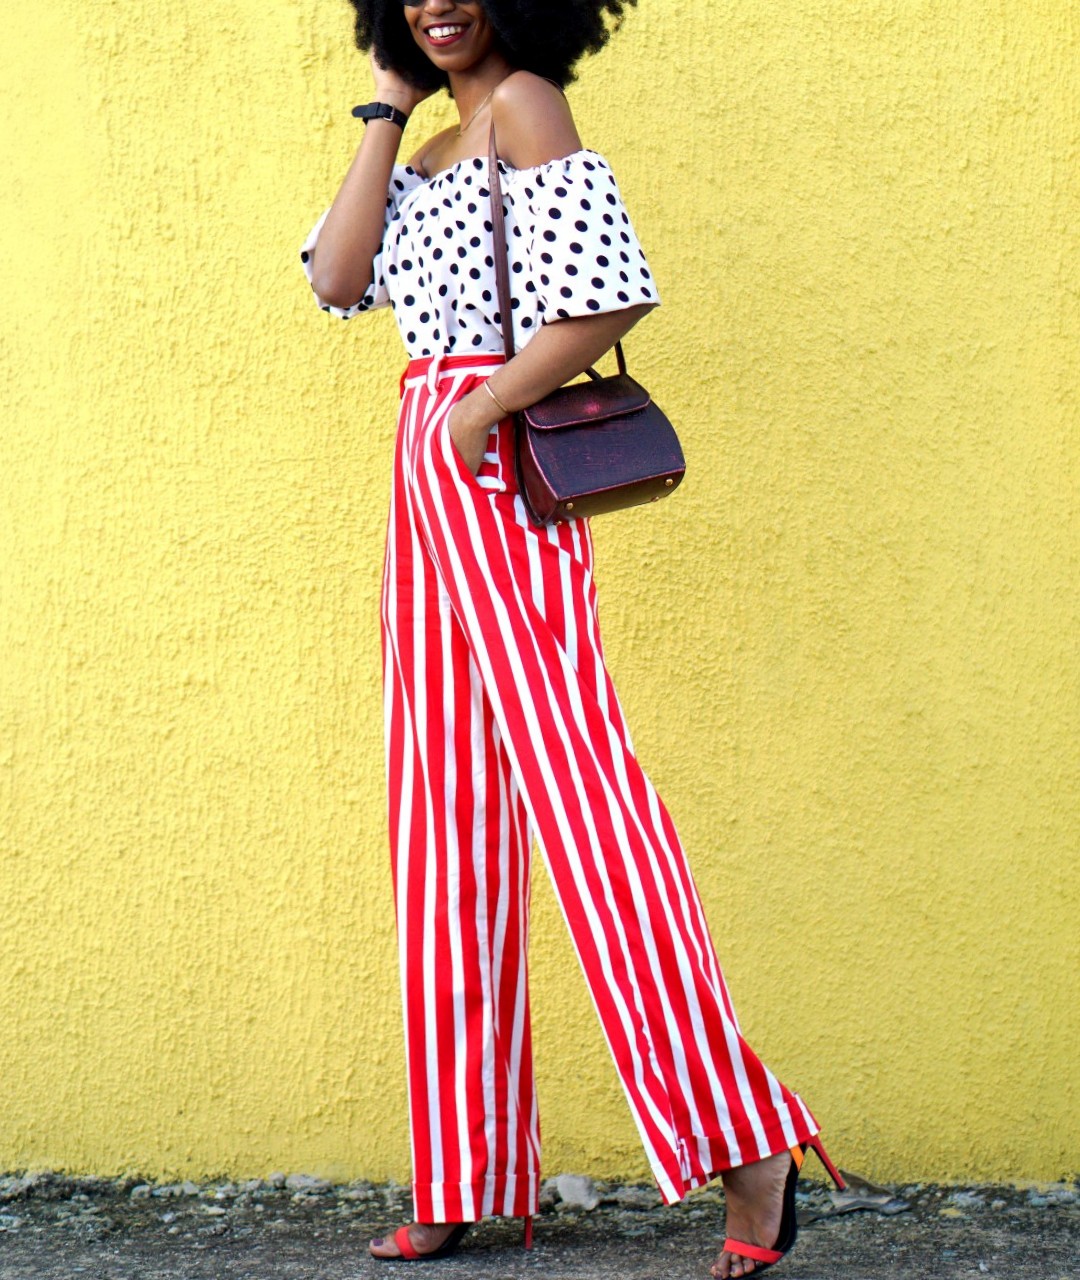 Mixed prints fashion trend : Nigerian fashion blogger Cassie Daves In a polka dot off shoulder top and striped pants